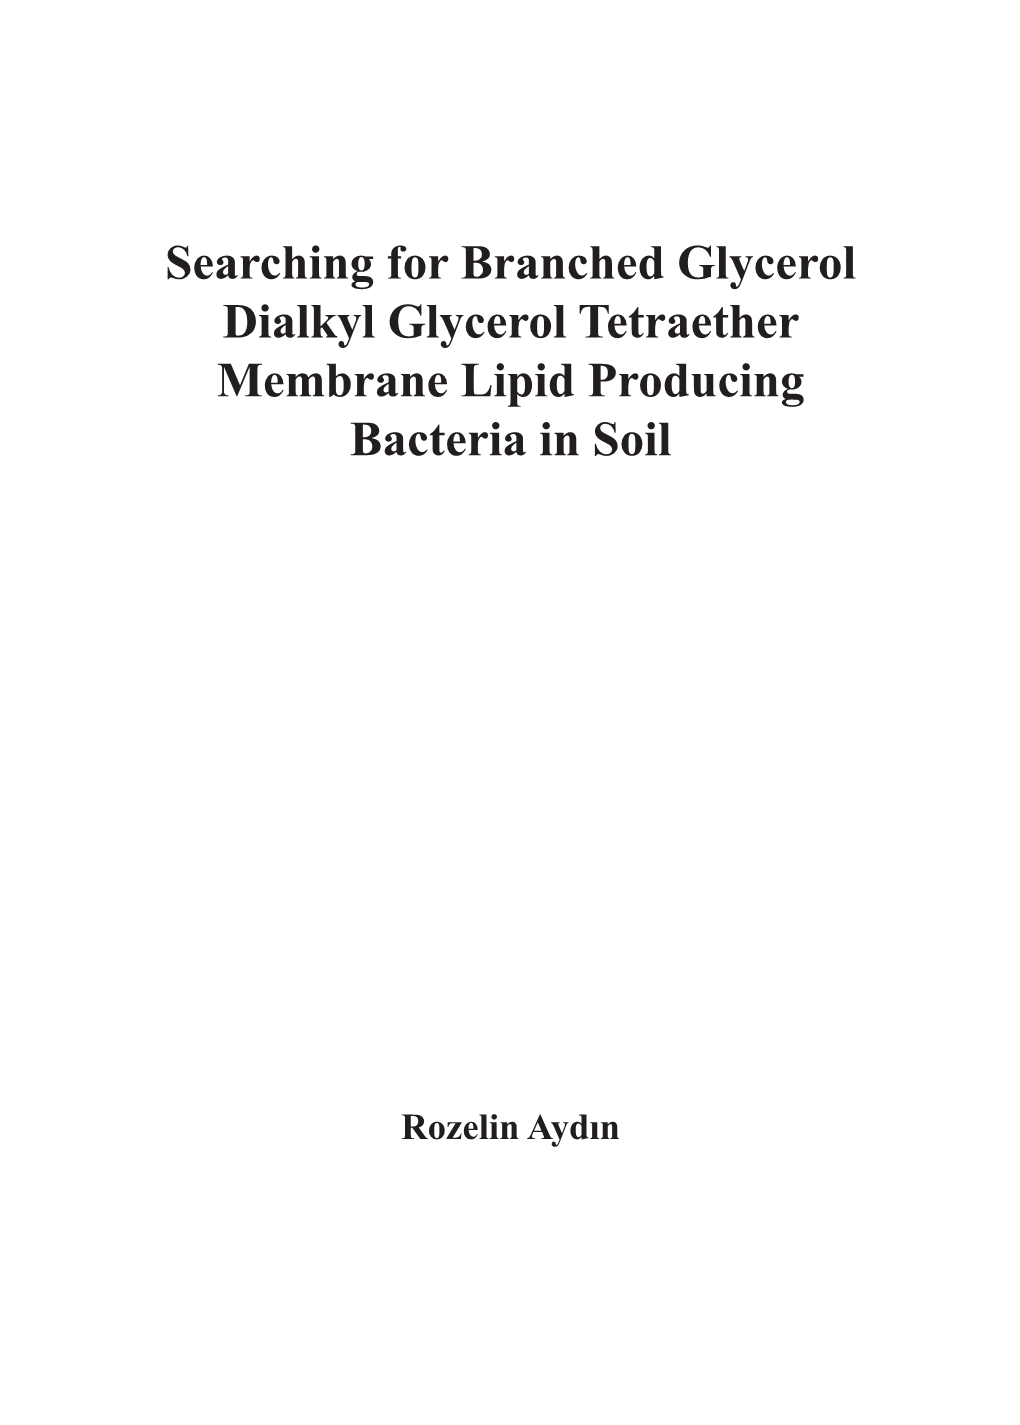 Searching for Branched Glycerol Dialkyl Glycerol Tetraether Membrane Lipid Producing Bacteria in Soil